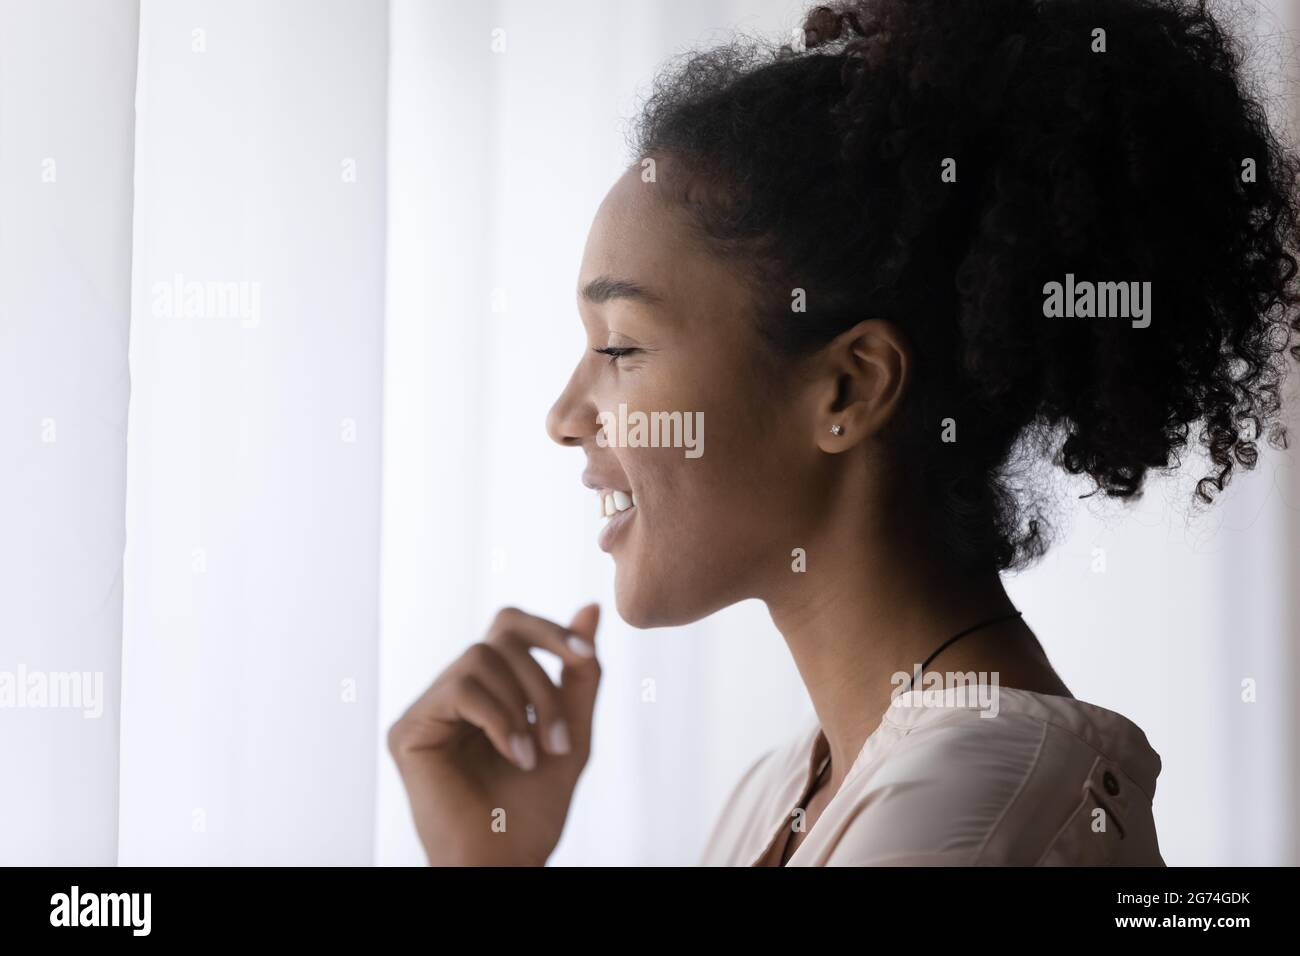 Head shot profile of smiling dreamy African American woman Stock Photo